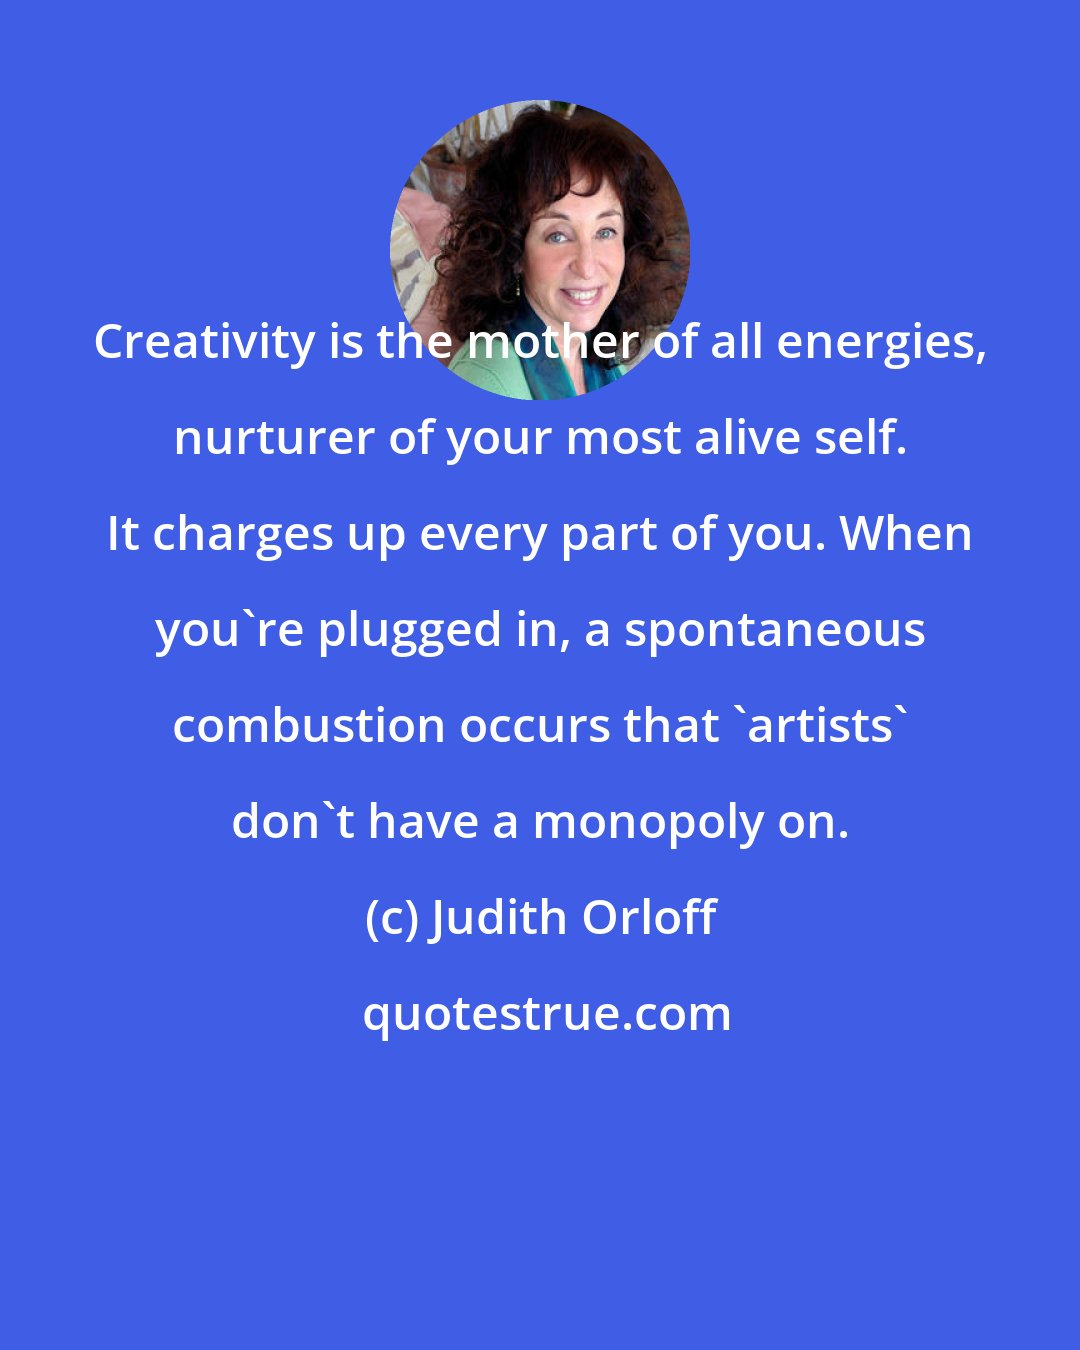 Judith Orloff: Creativity is the mother of all energies, nurturer of your most alive self. It charges up every part of you. When you're plugged in, a spontaneous combustion occurs that 'artists' don't have a monopoly on.